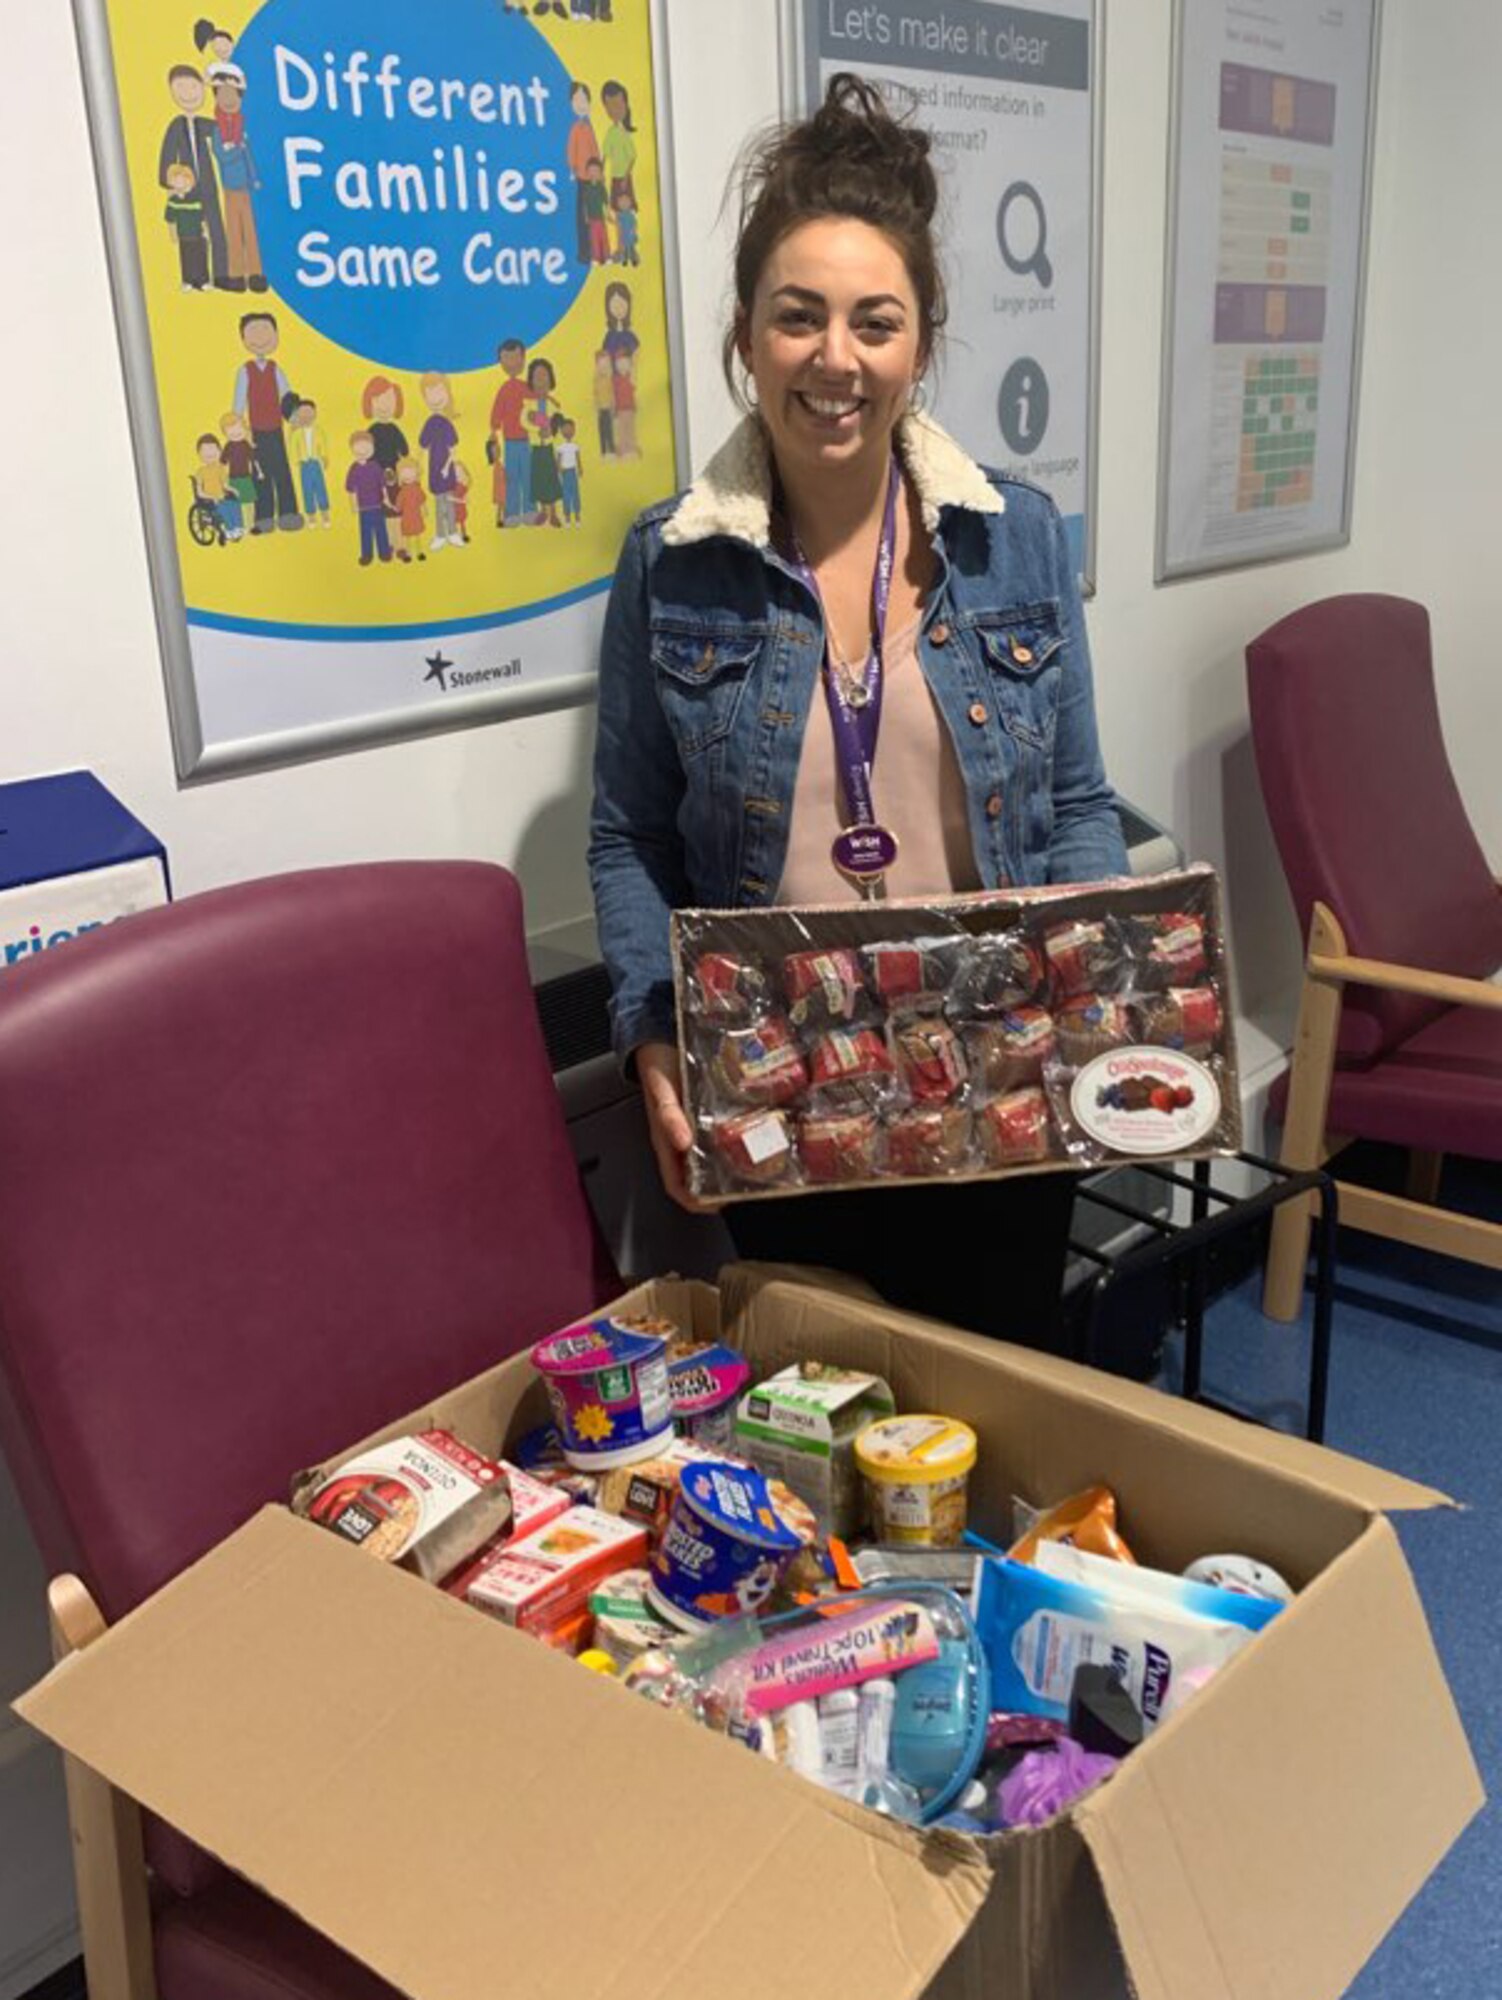 A fundraising officer accepts food and hygiene item donations from Team Mildenhall at West Suffolk Hospital in Bury St Edmunds, England, June 9, 2020. The base has donated items since February to support front-line healthcare workers fighting COVID-19. (Courtesy photo)